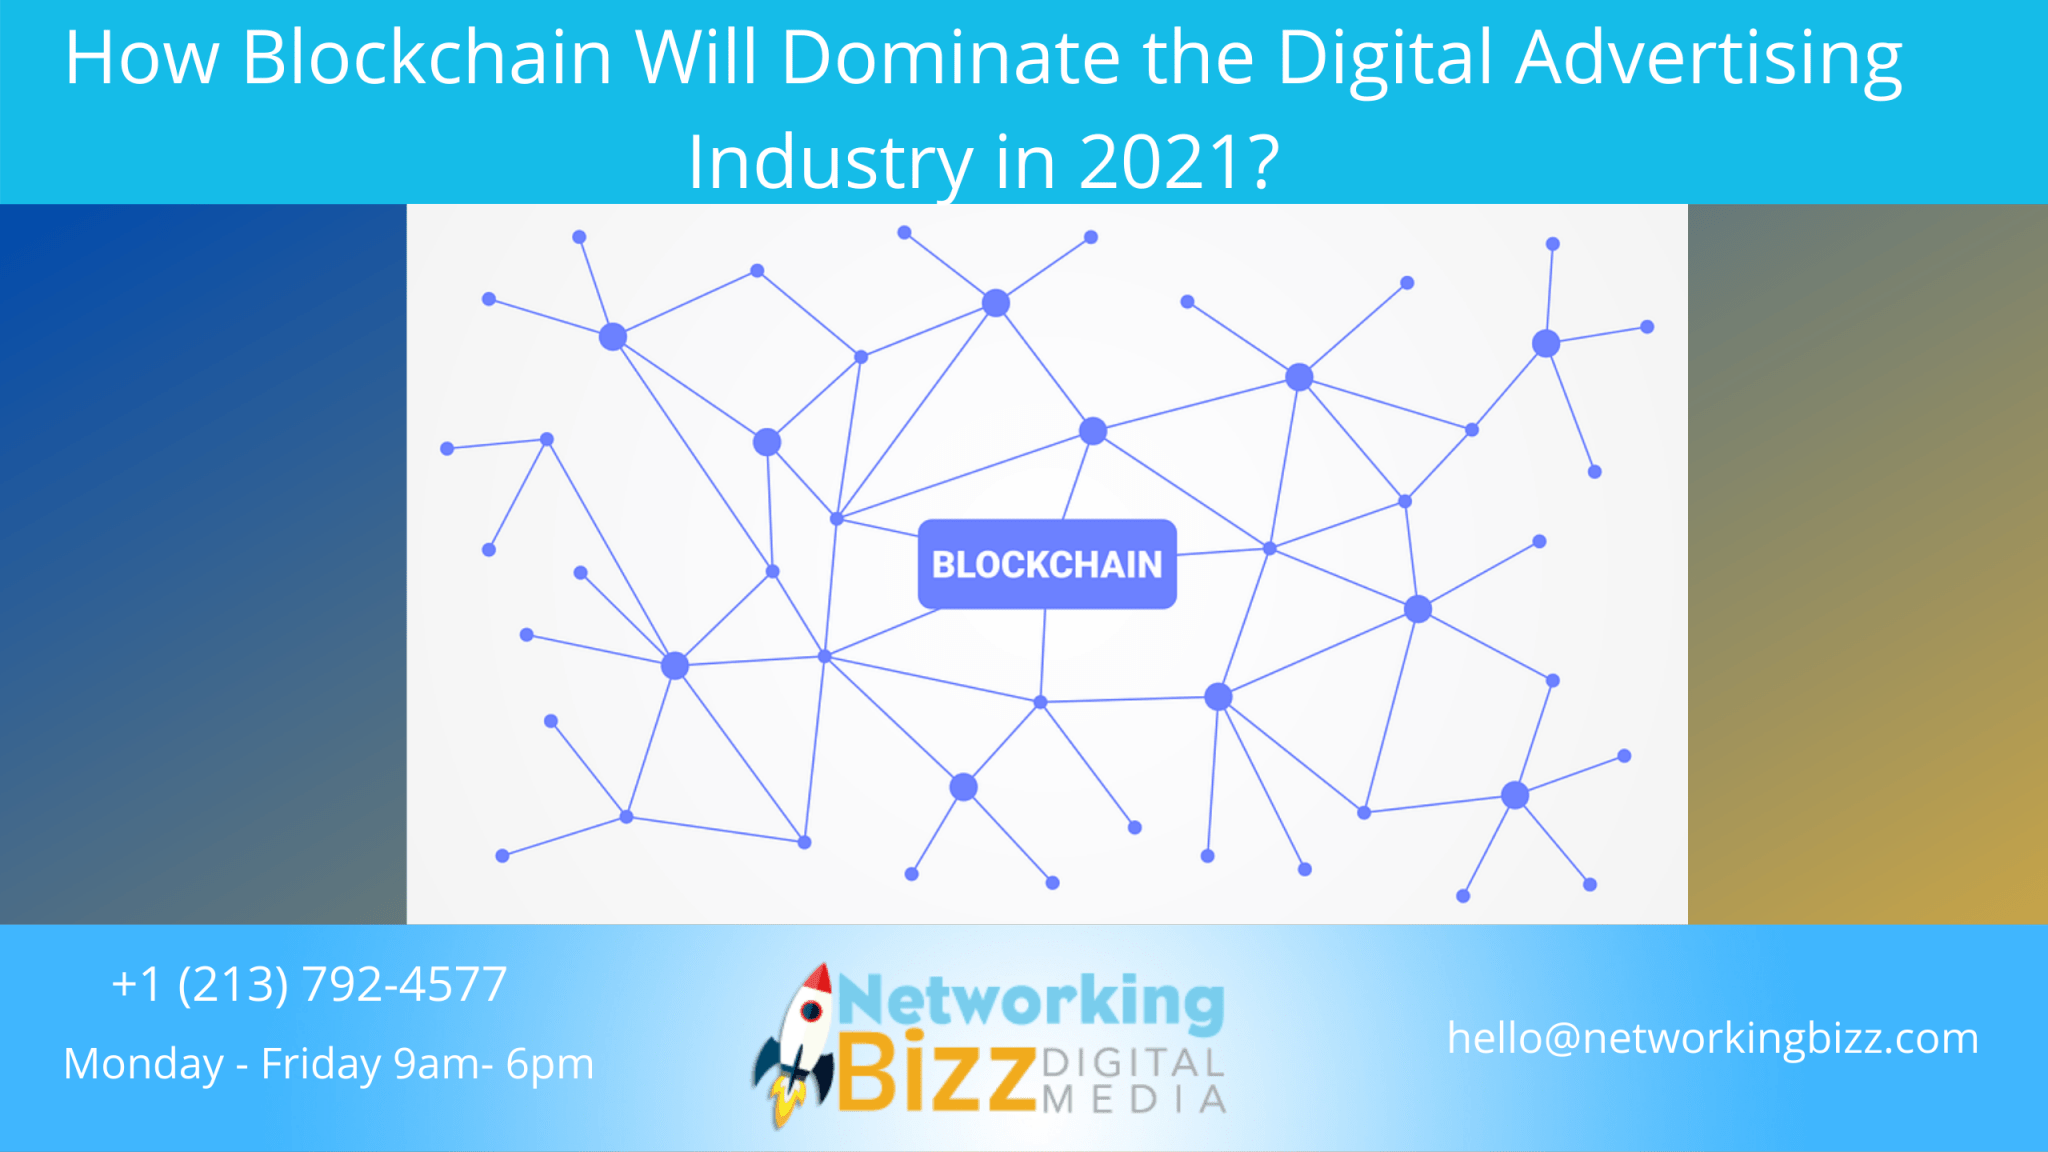 How Blockchain Will Dominate the Digital Advertising Industry in 2021?